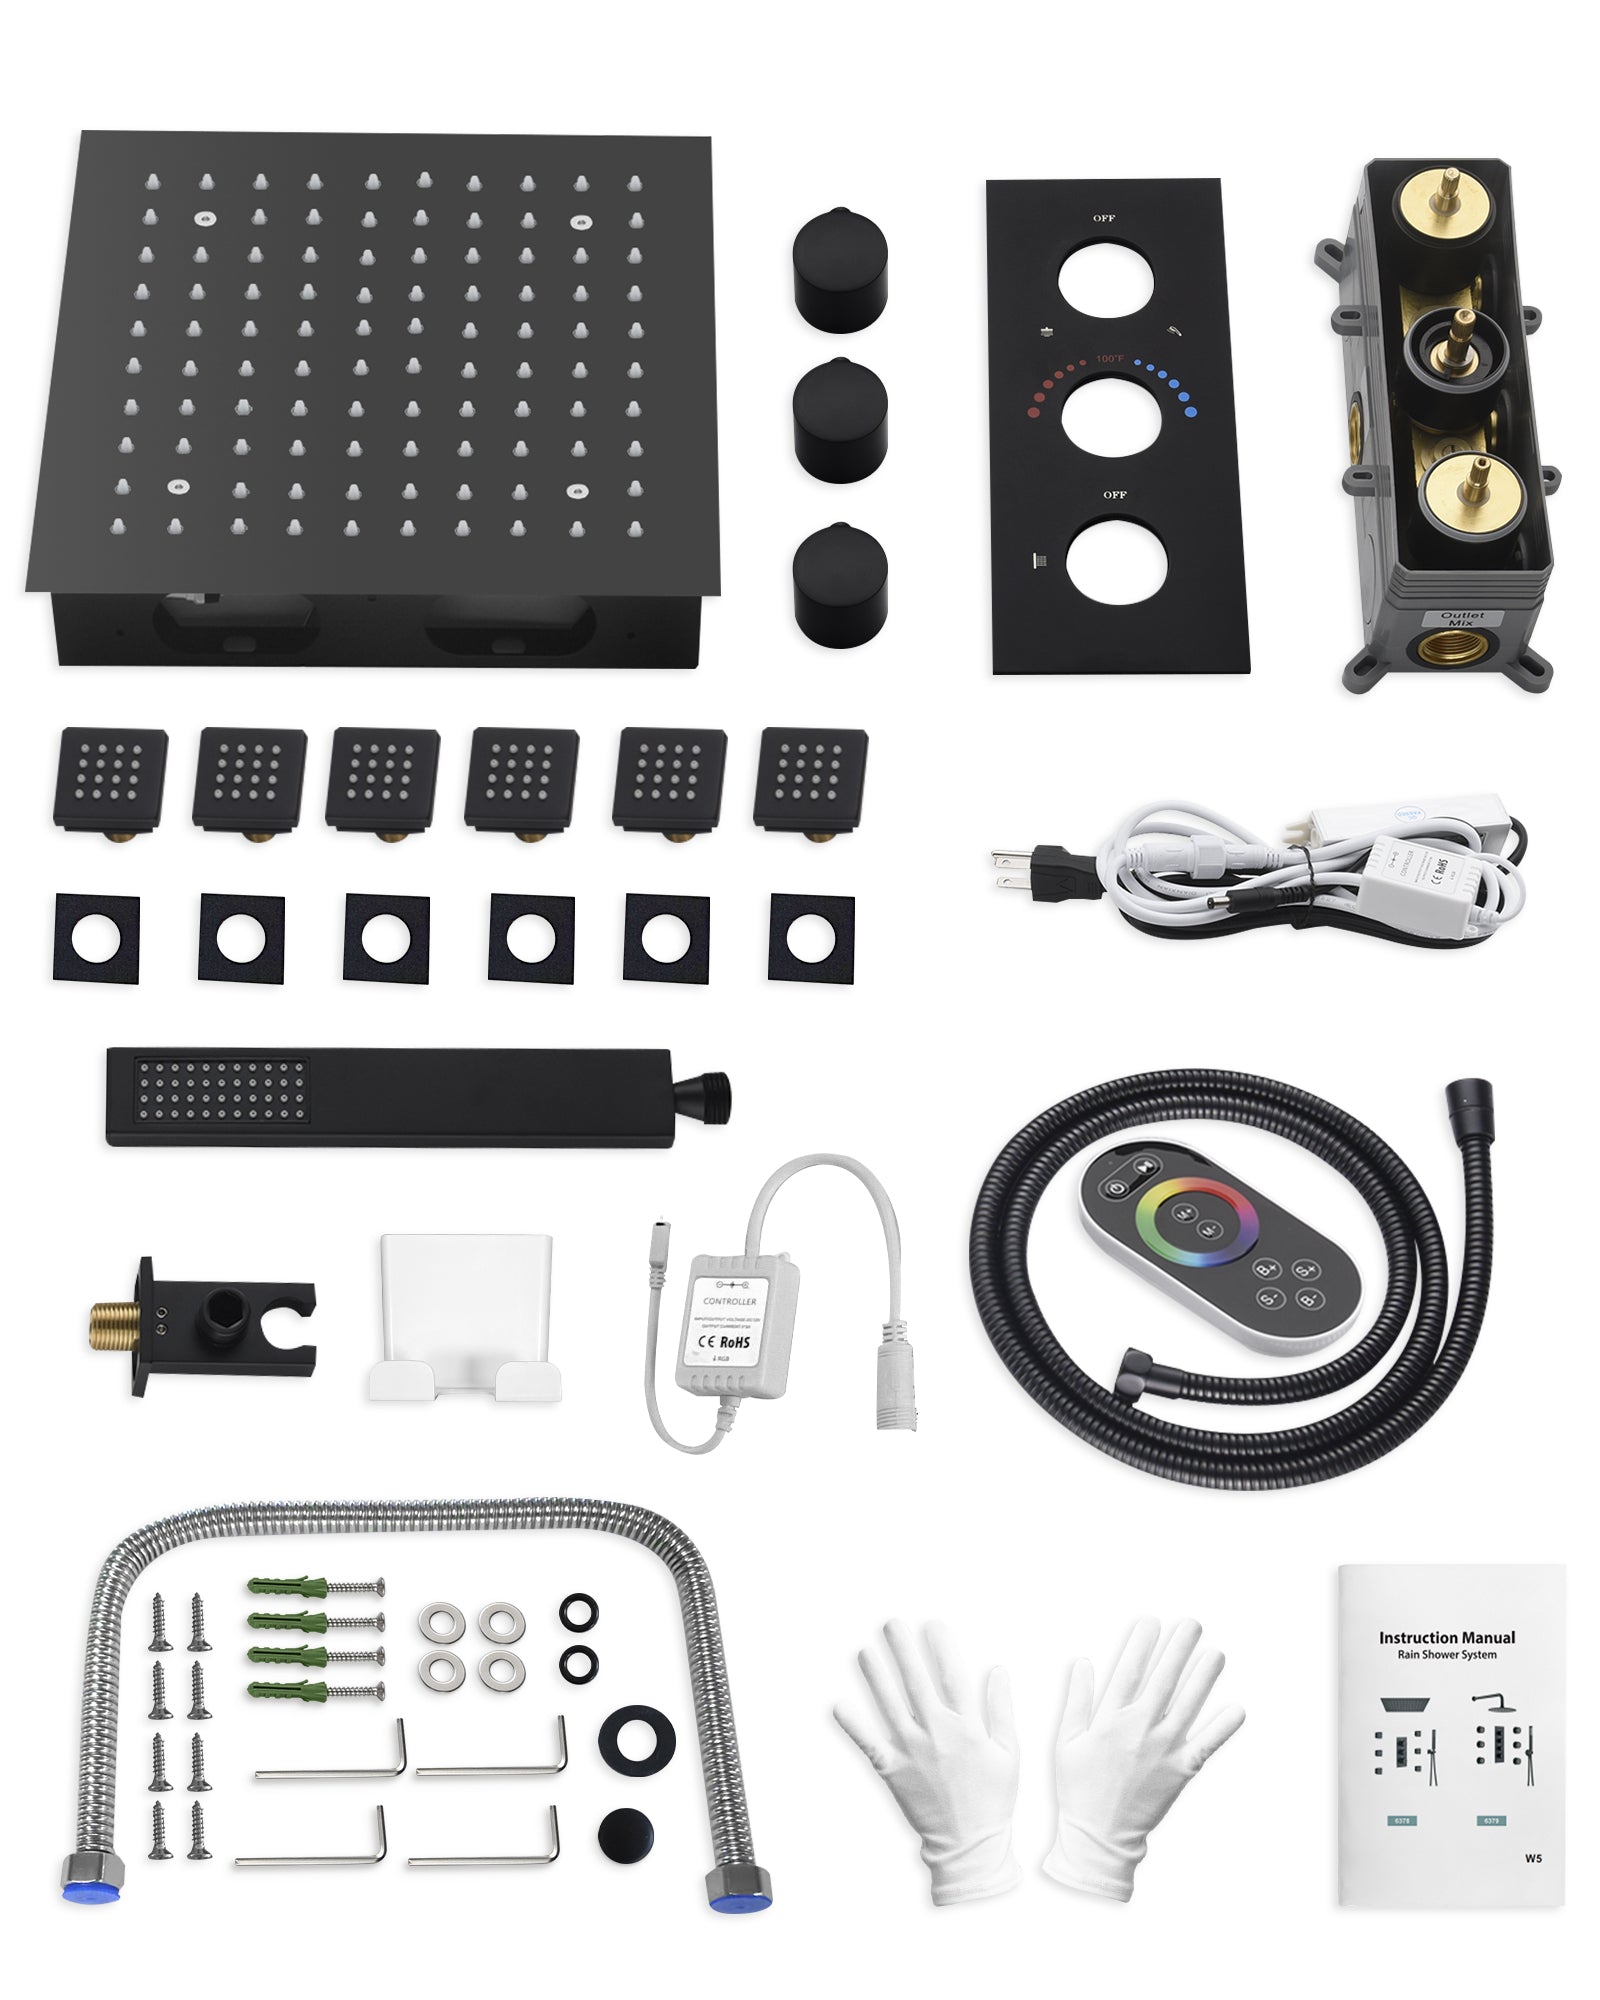 Comprehensive packing list for the Everstein M6378GMLI shower system fixtures detailing all included components_jpg